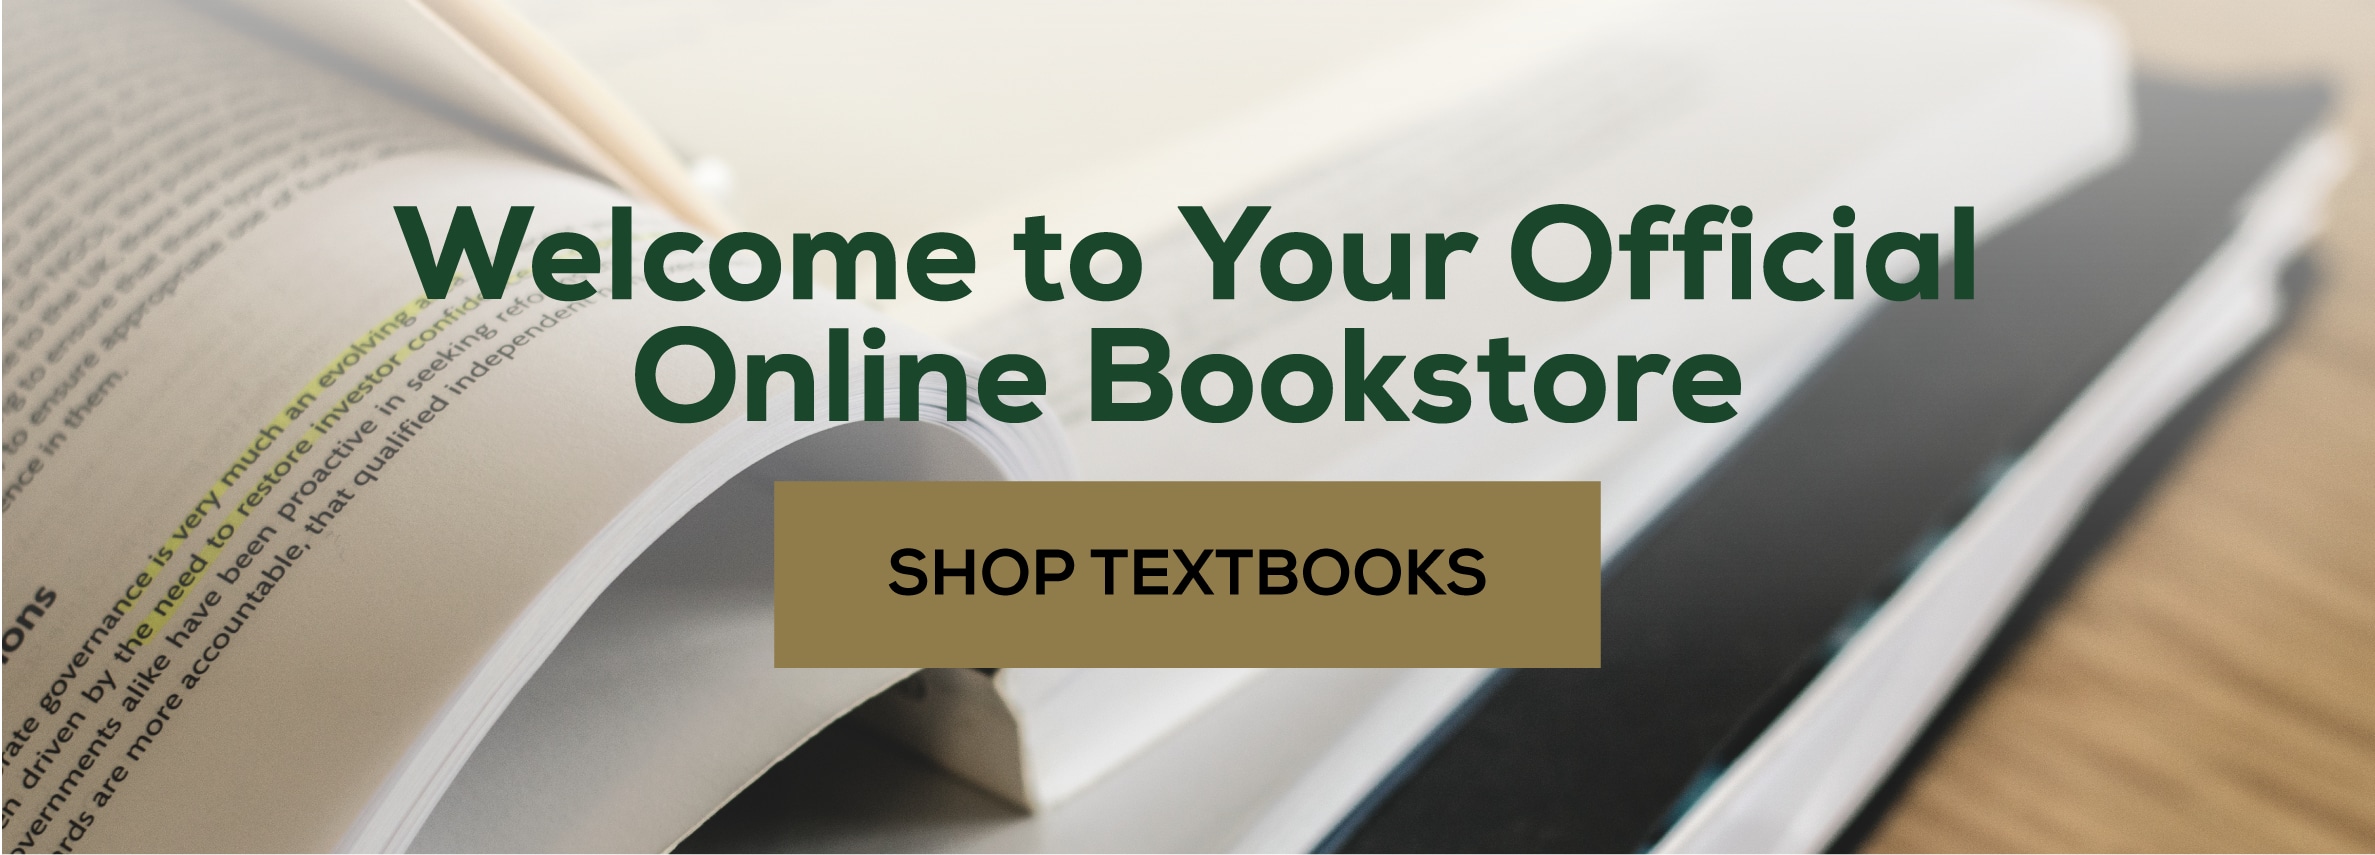 Welcome to your official online bookstore. Shop textbooks.